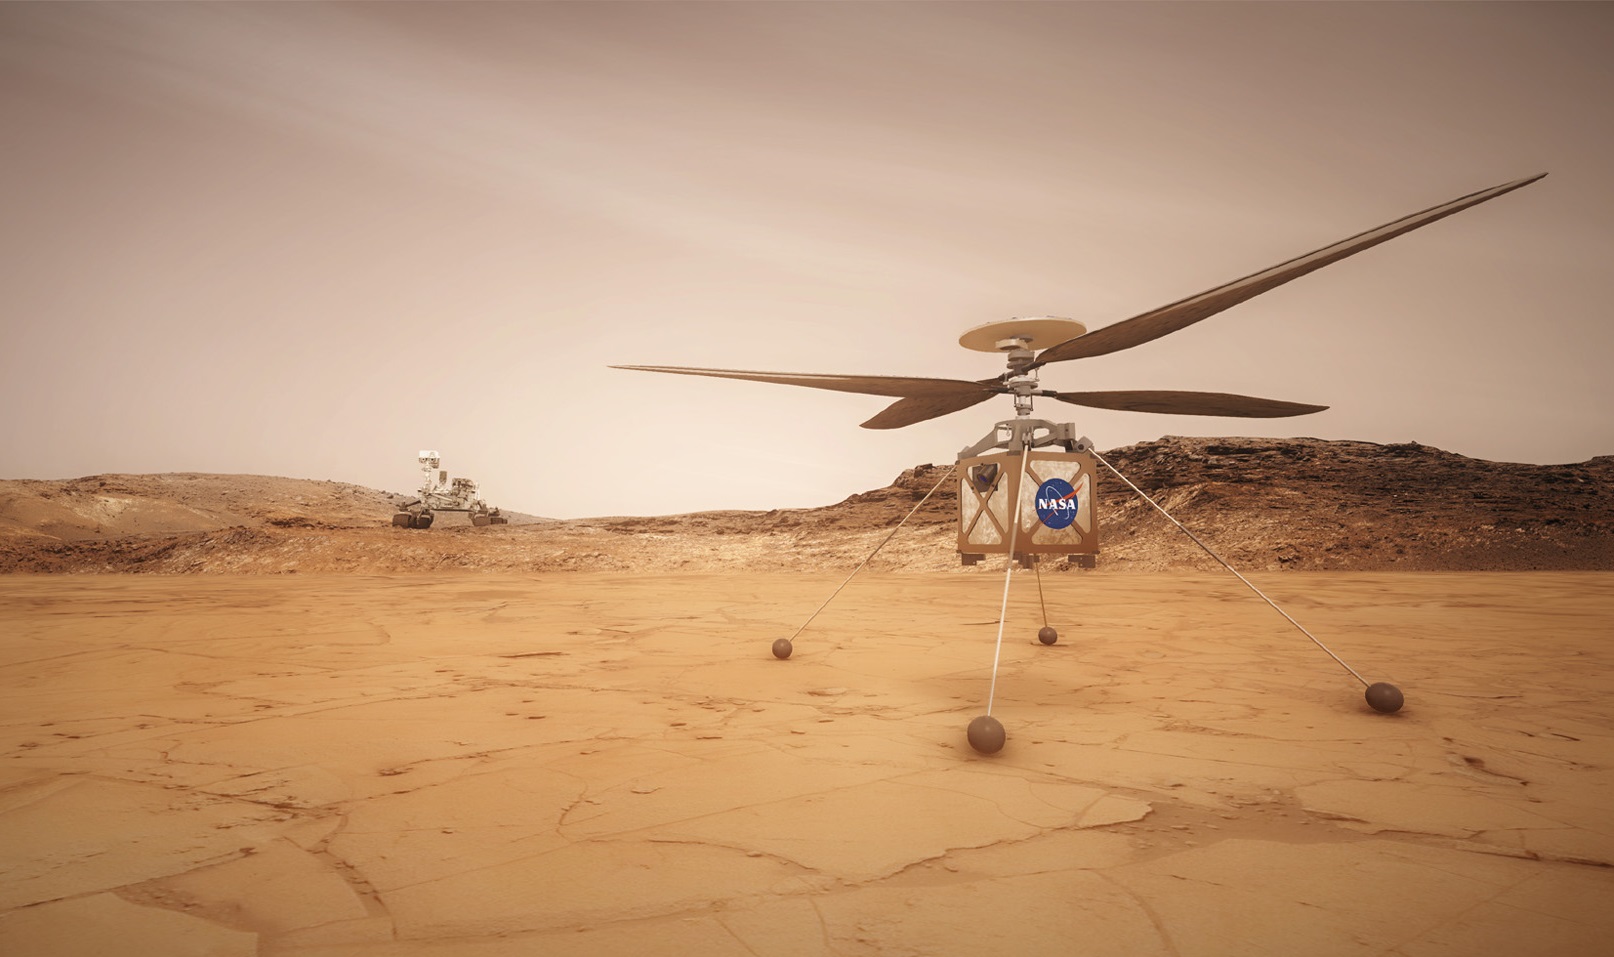 Mars Helicopter Bound For The Red Planet Takes To The Air For The